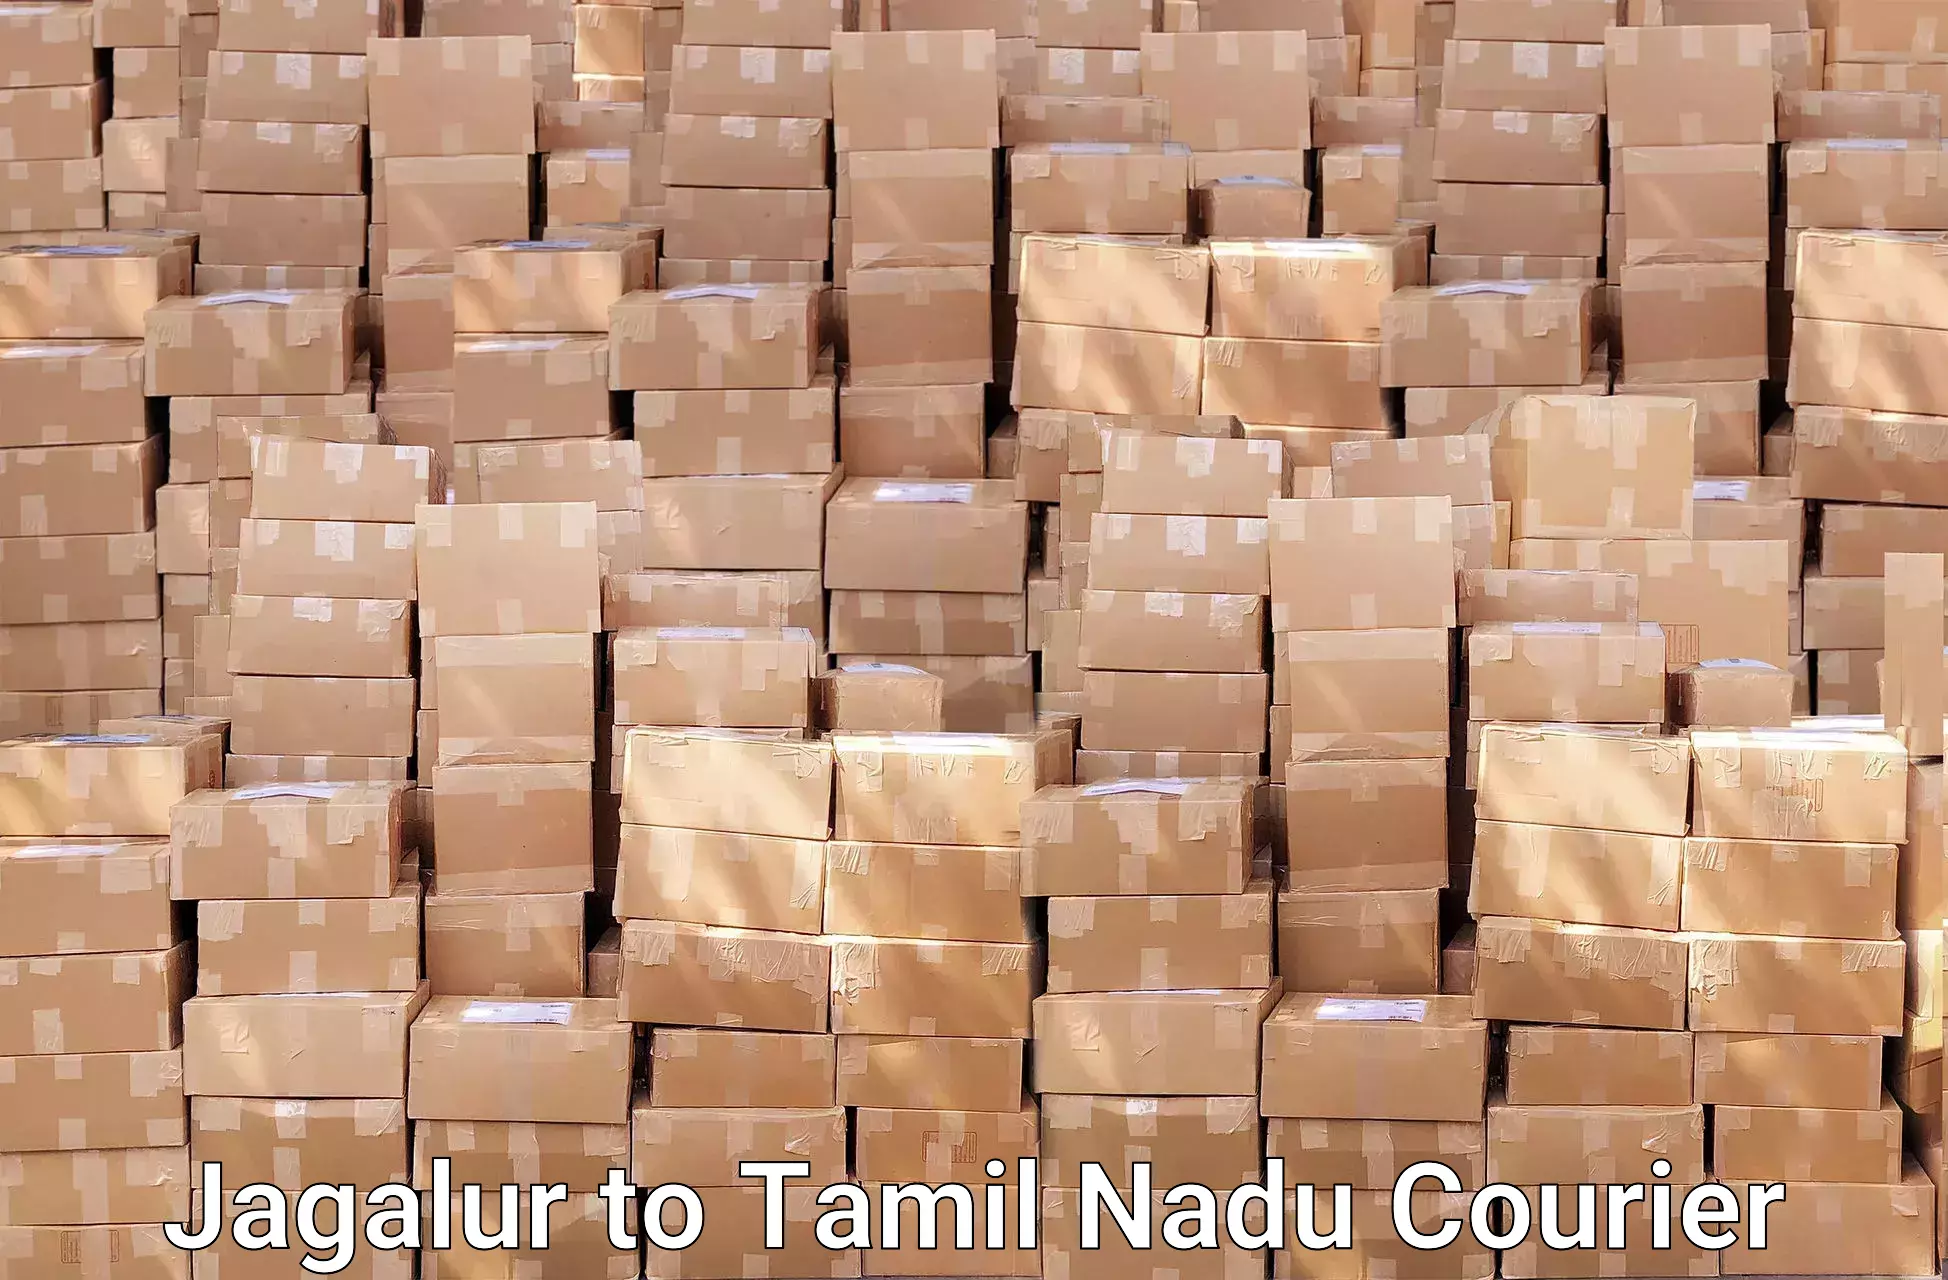 Quality relocation services Jagalur to Tamil Nadu